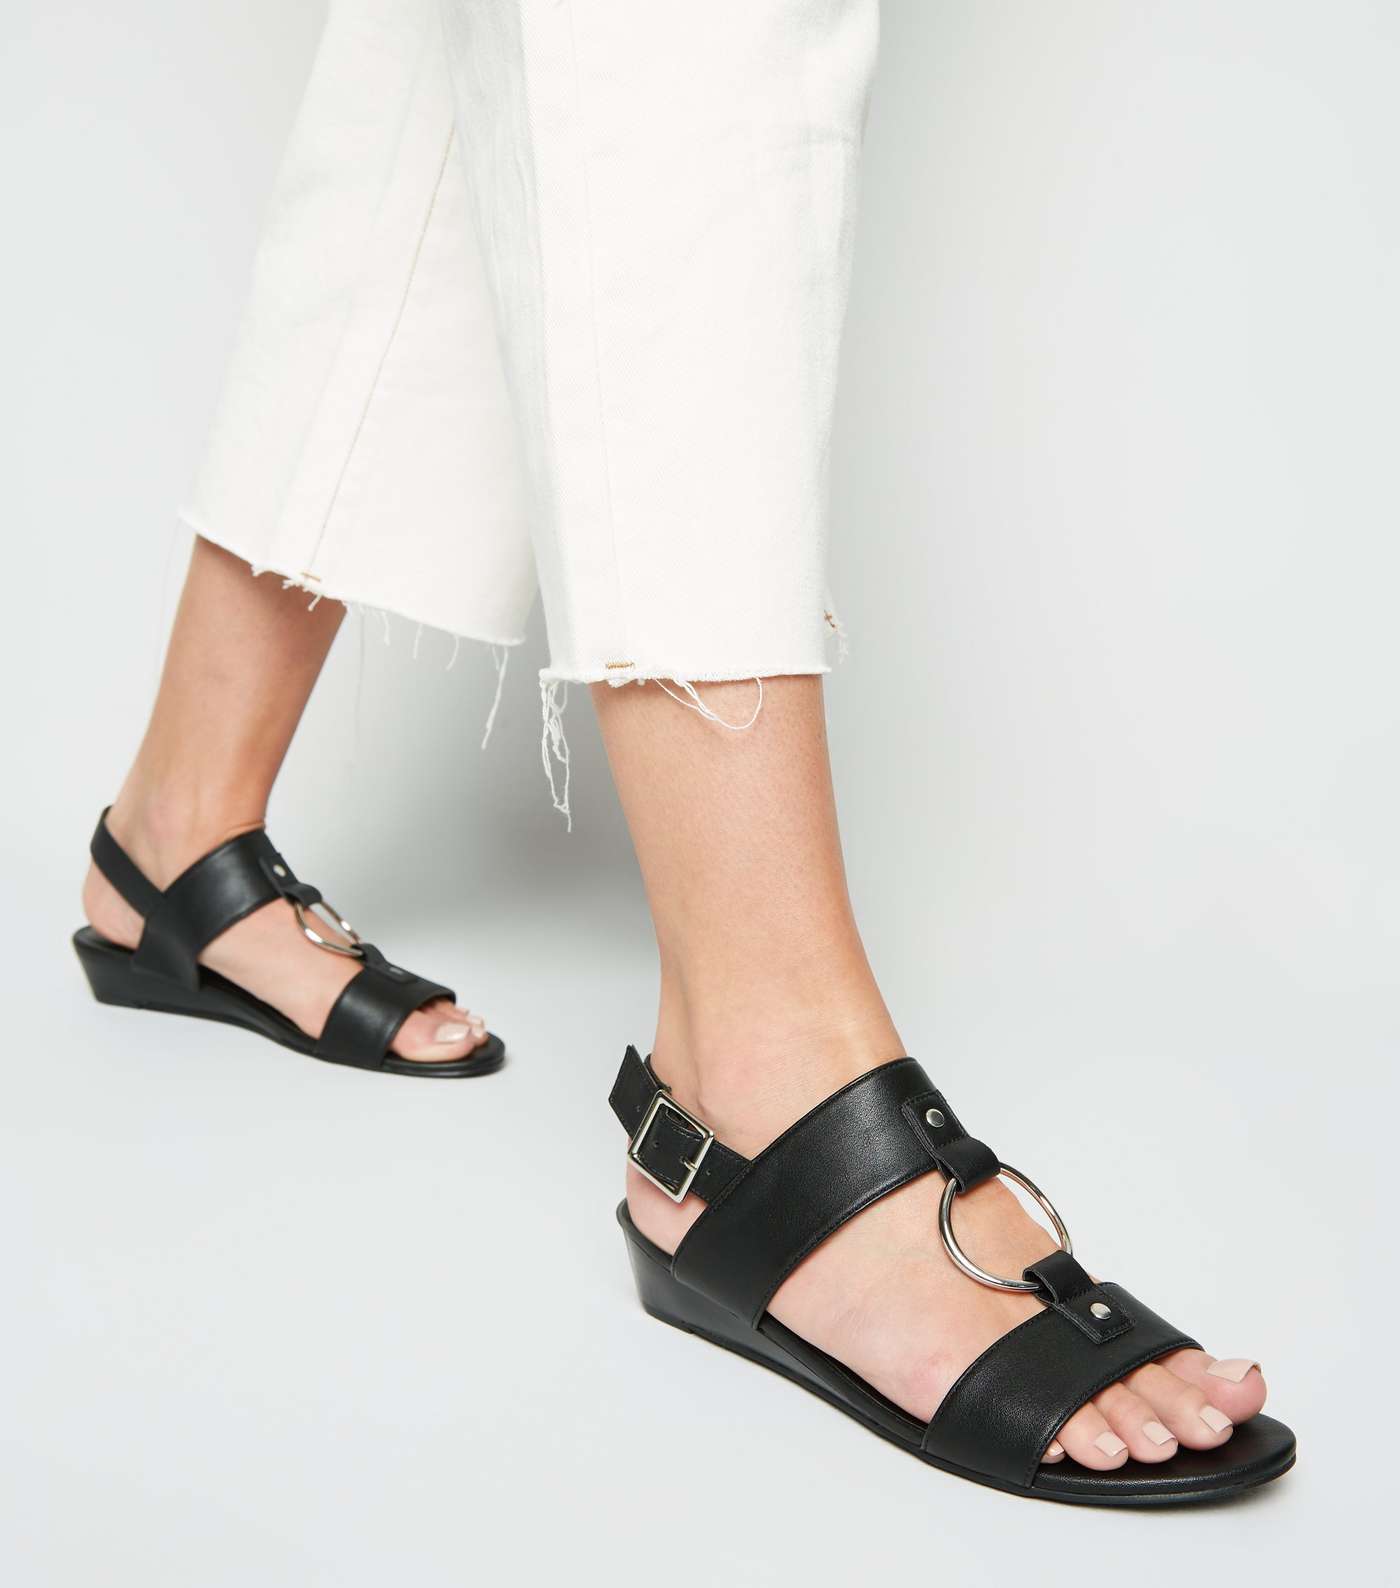 Black Leather-Look Ring Strap Wedge Sandals Image 2